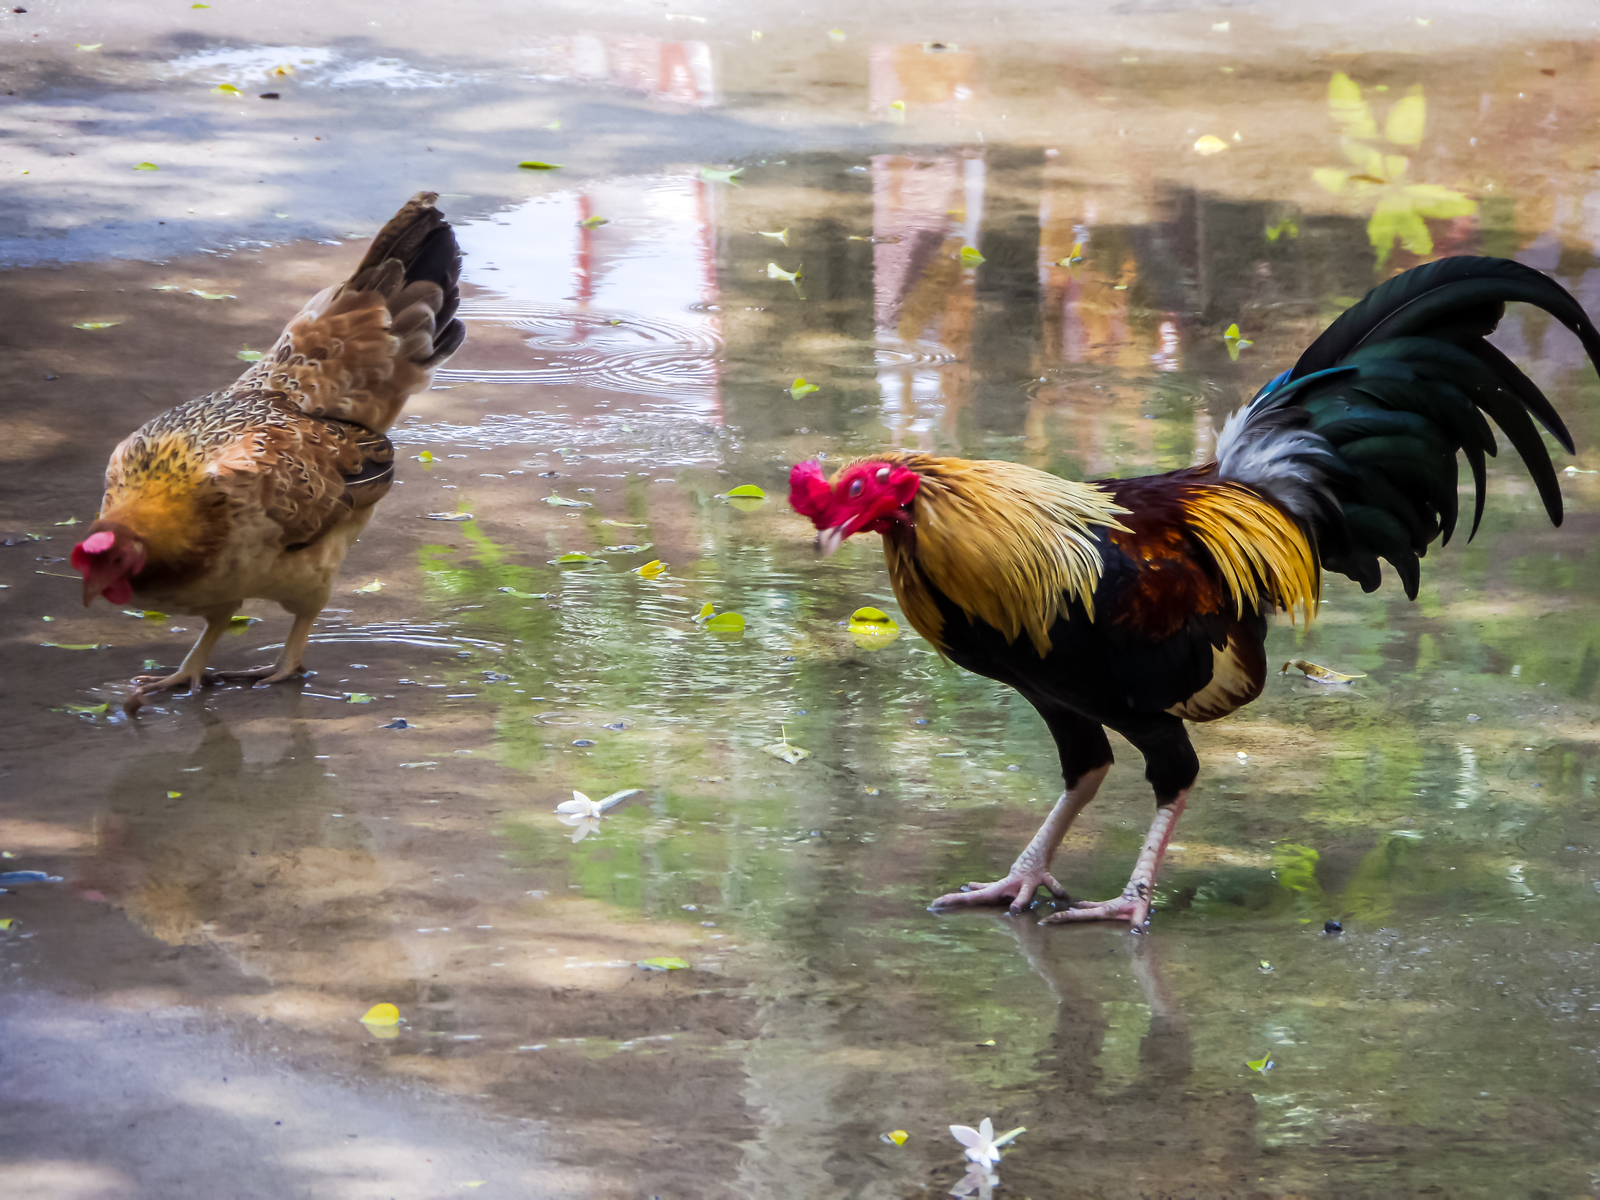 Two chickens feeding in a small enclosure in thailand.